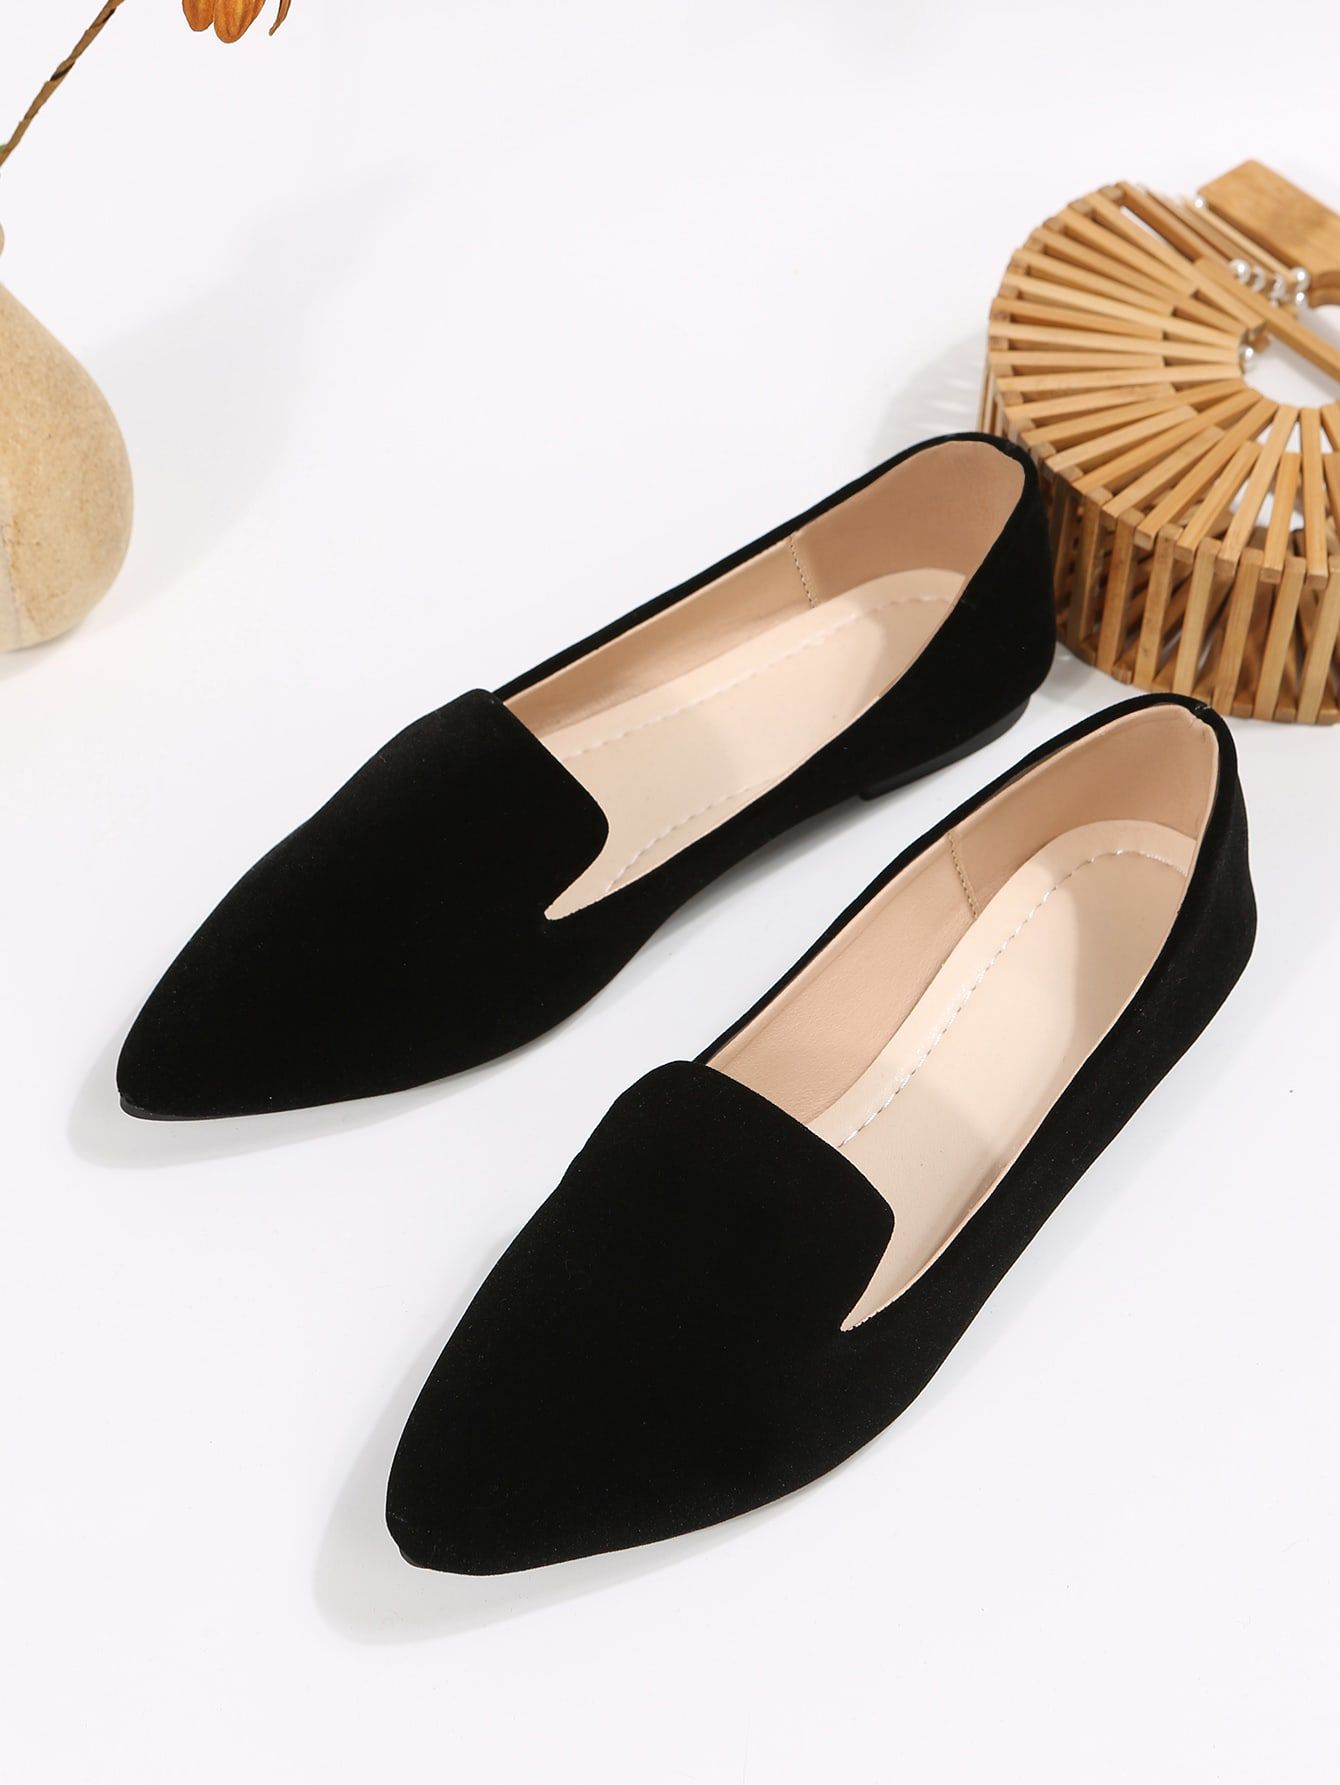 The Ultimate Guide to Styling Black Suede
Loafers